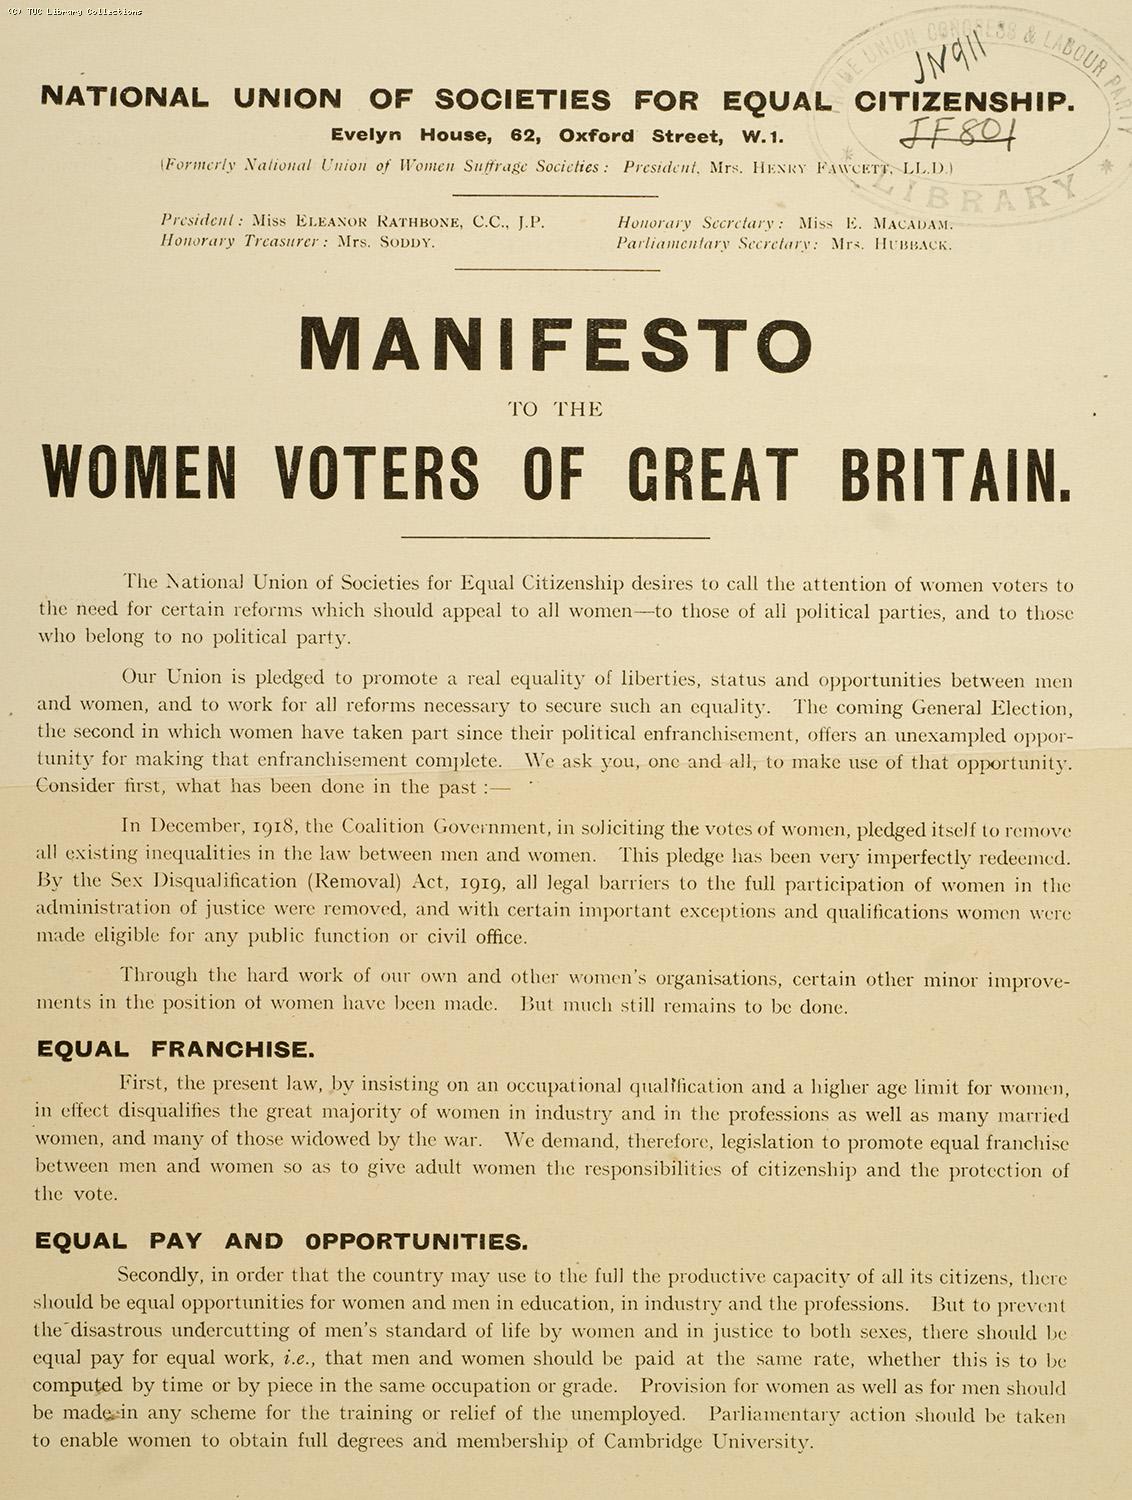 Manifesto to the women voters of Great Britain